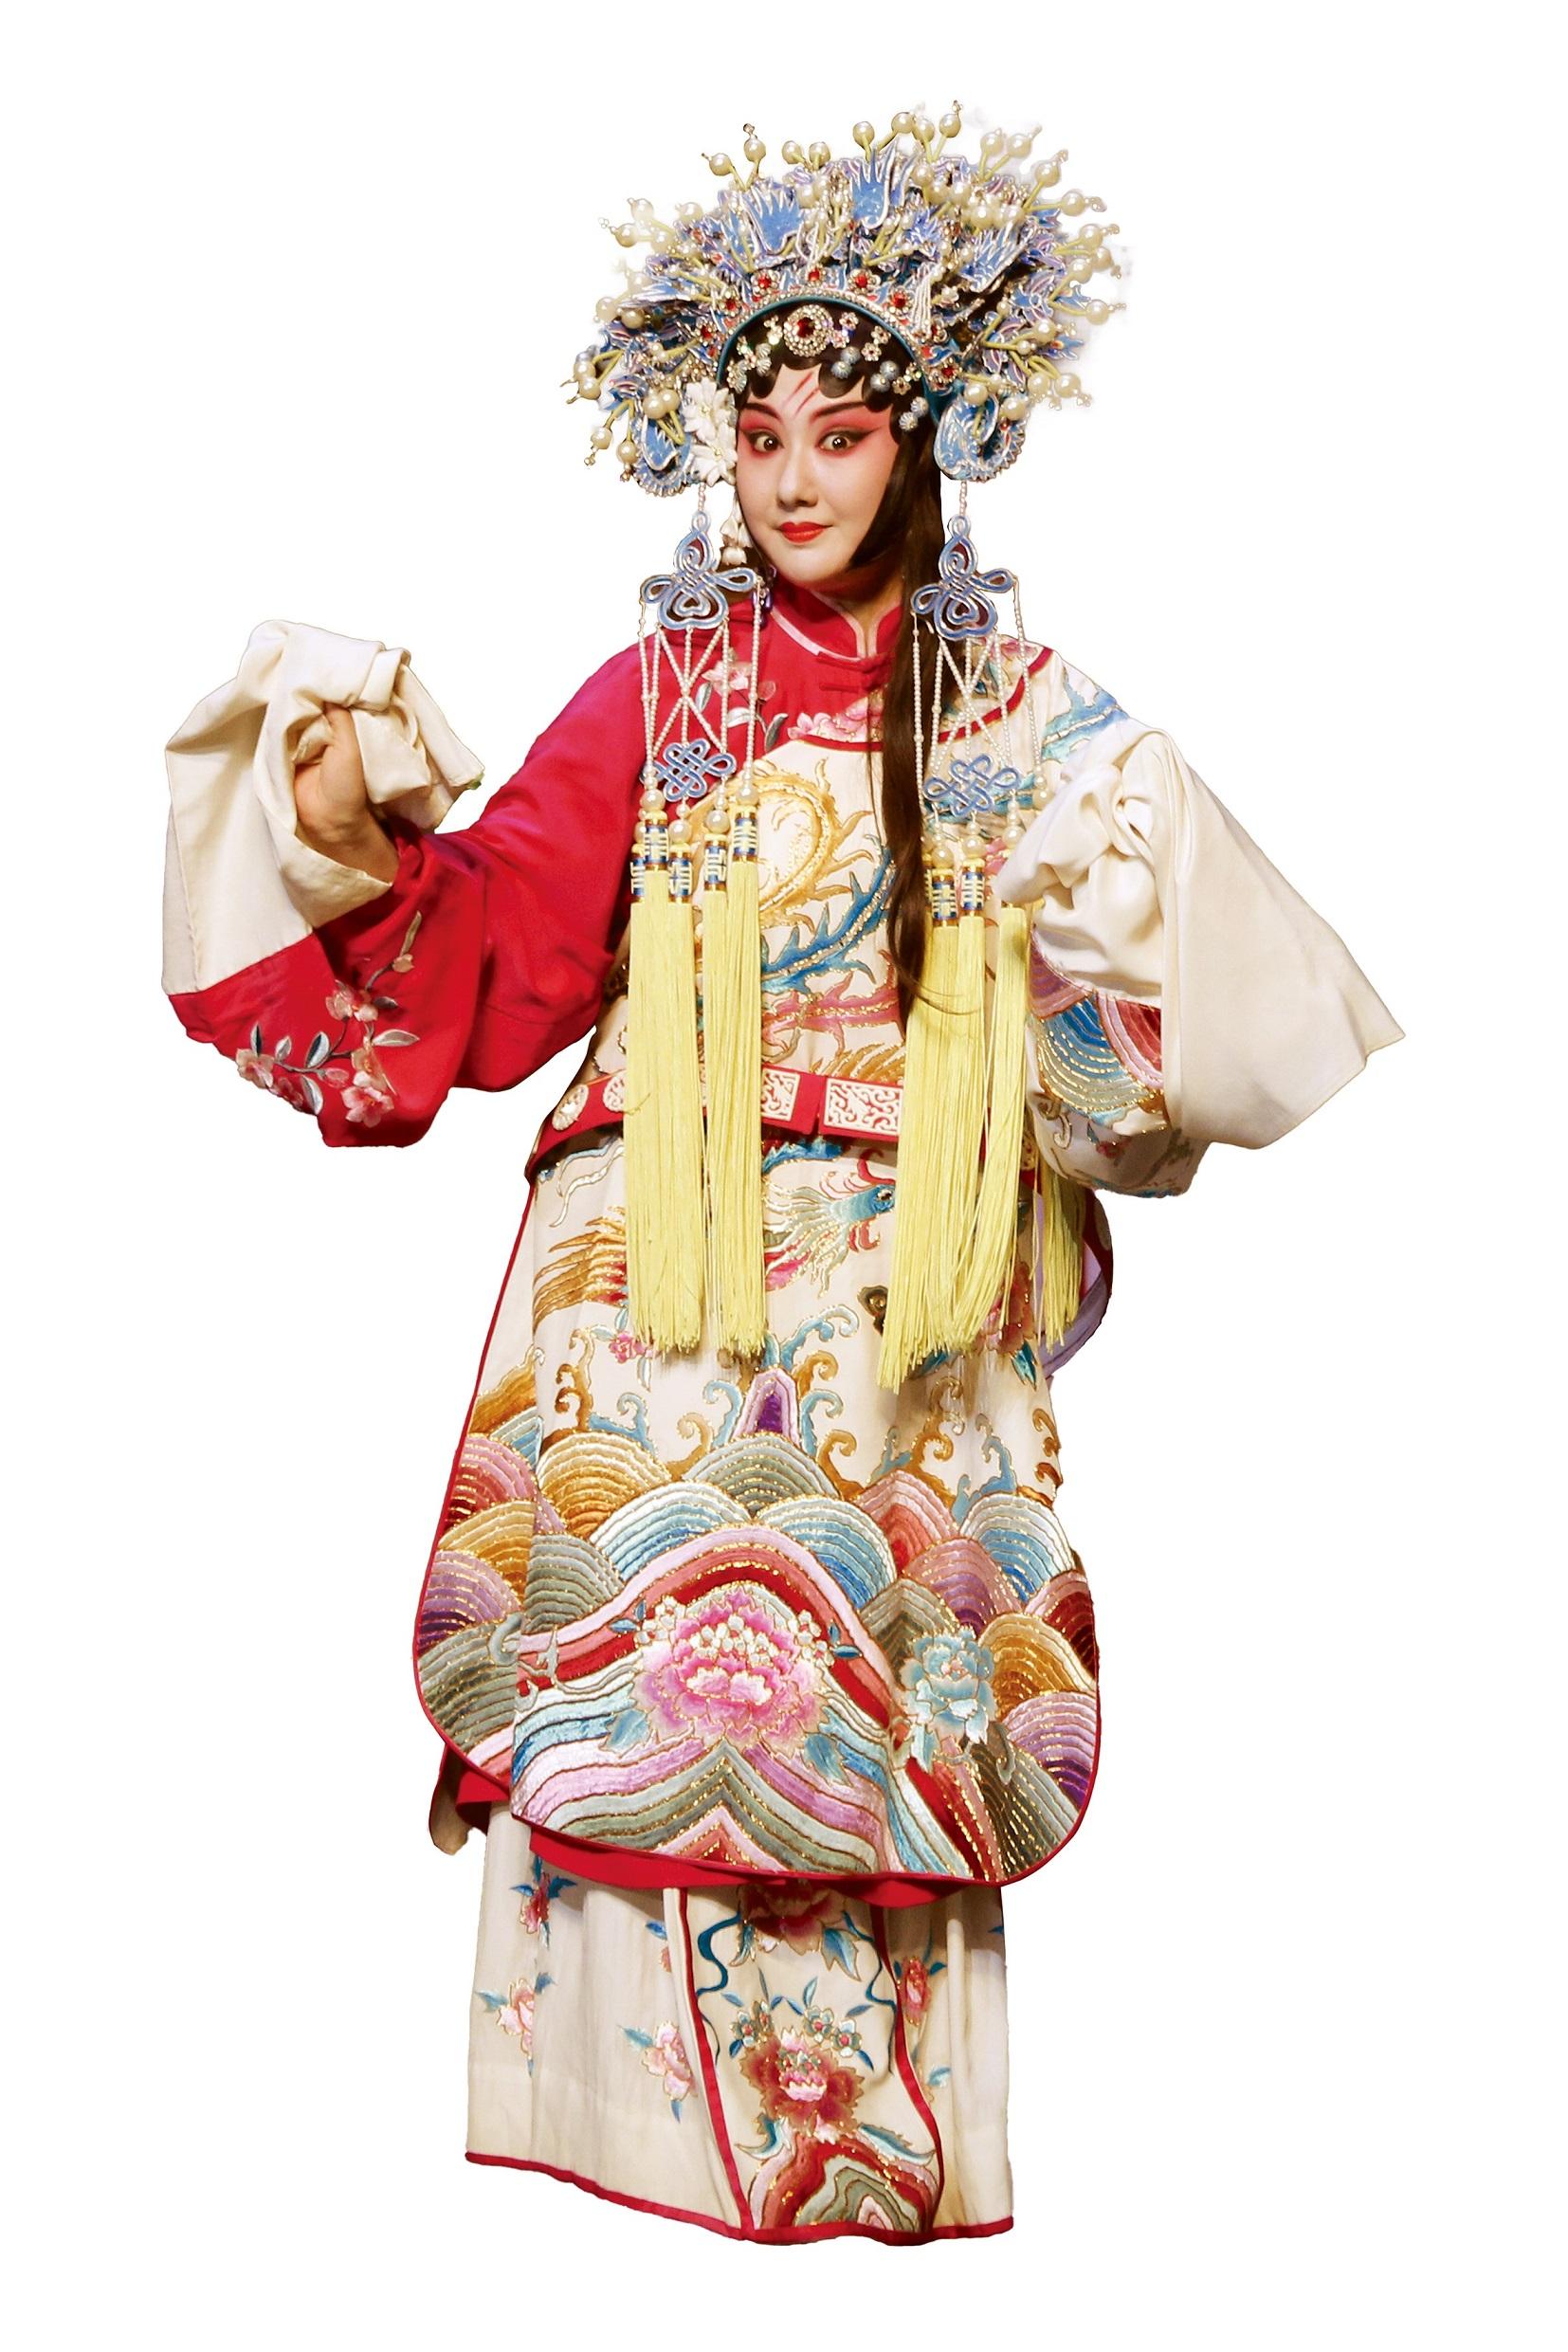 The Chinese Opera Festival (COF), presented by the Leisure and Cultural Services Department, will stage quality operatic programmes from June to October. Photo shows Wang Li, a winner of the China Theatre Plum Blossom Award, who will come to Hong Kong with the Wuhan Han Opera Theatre and perform in the COF.